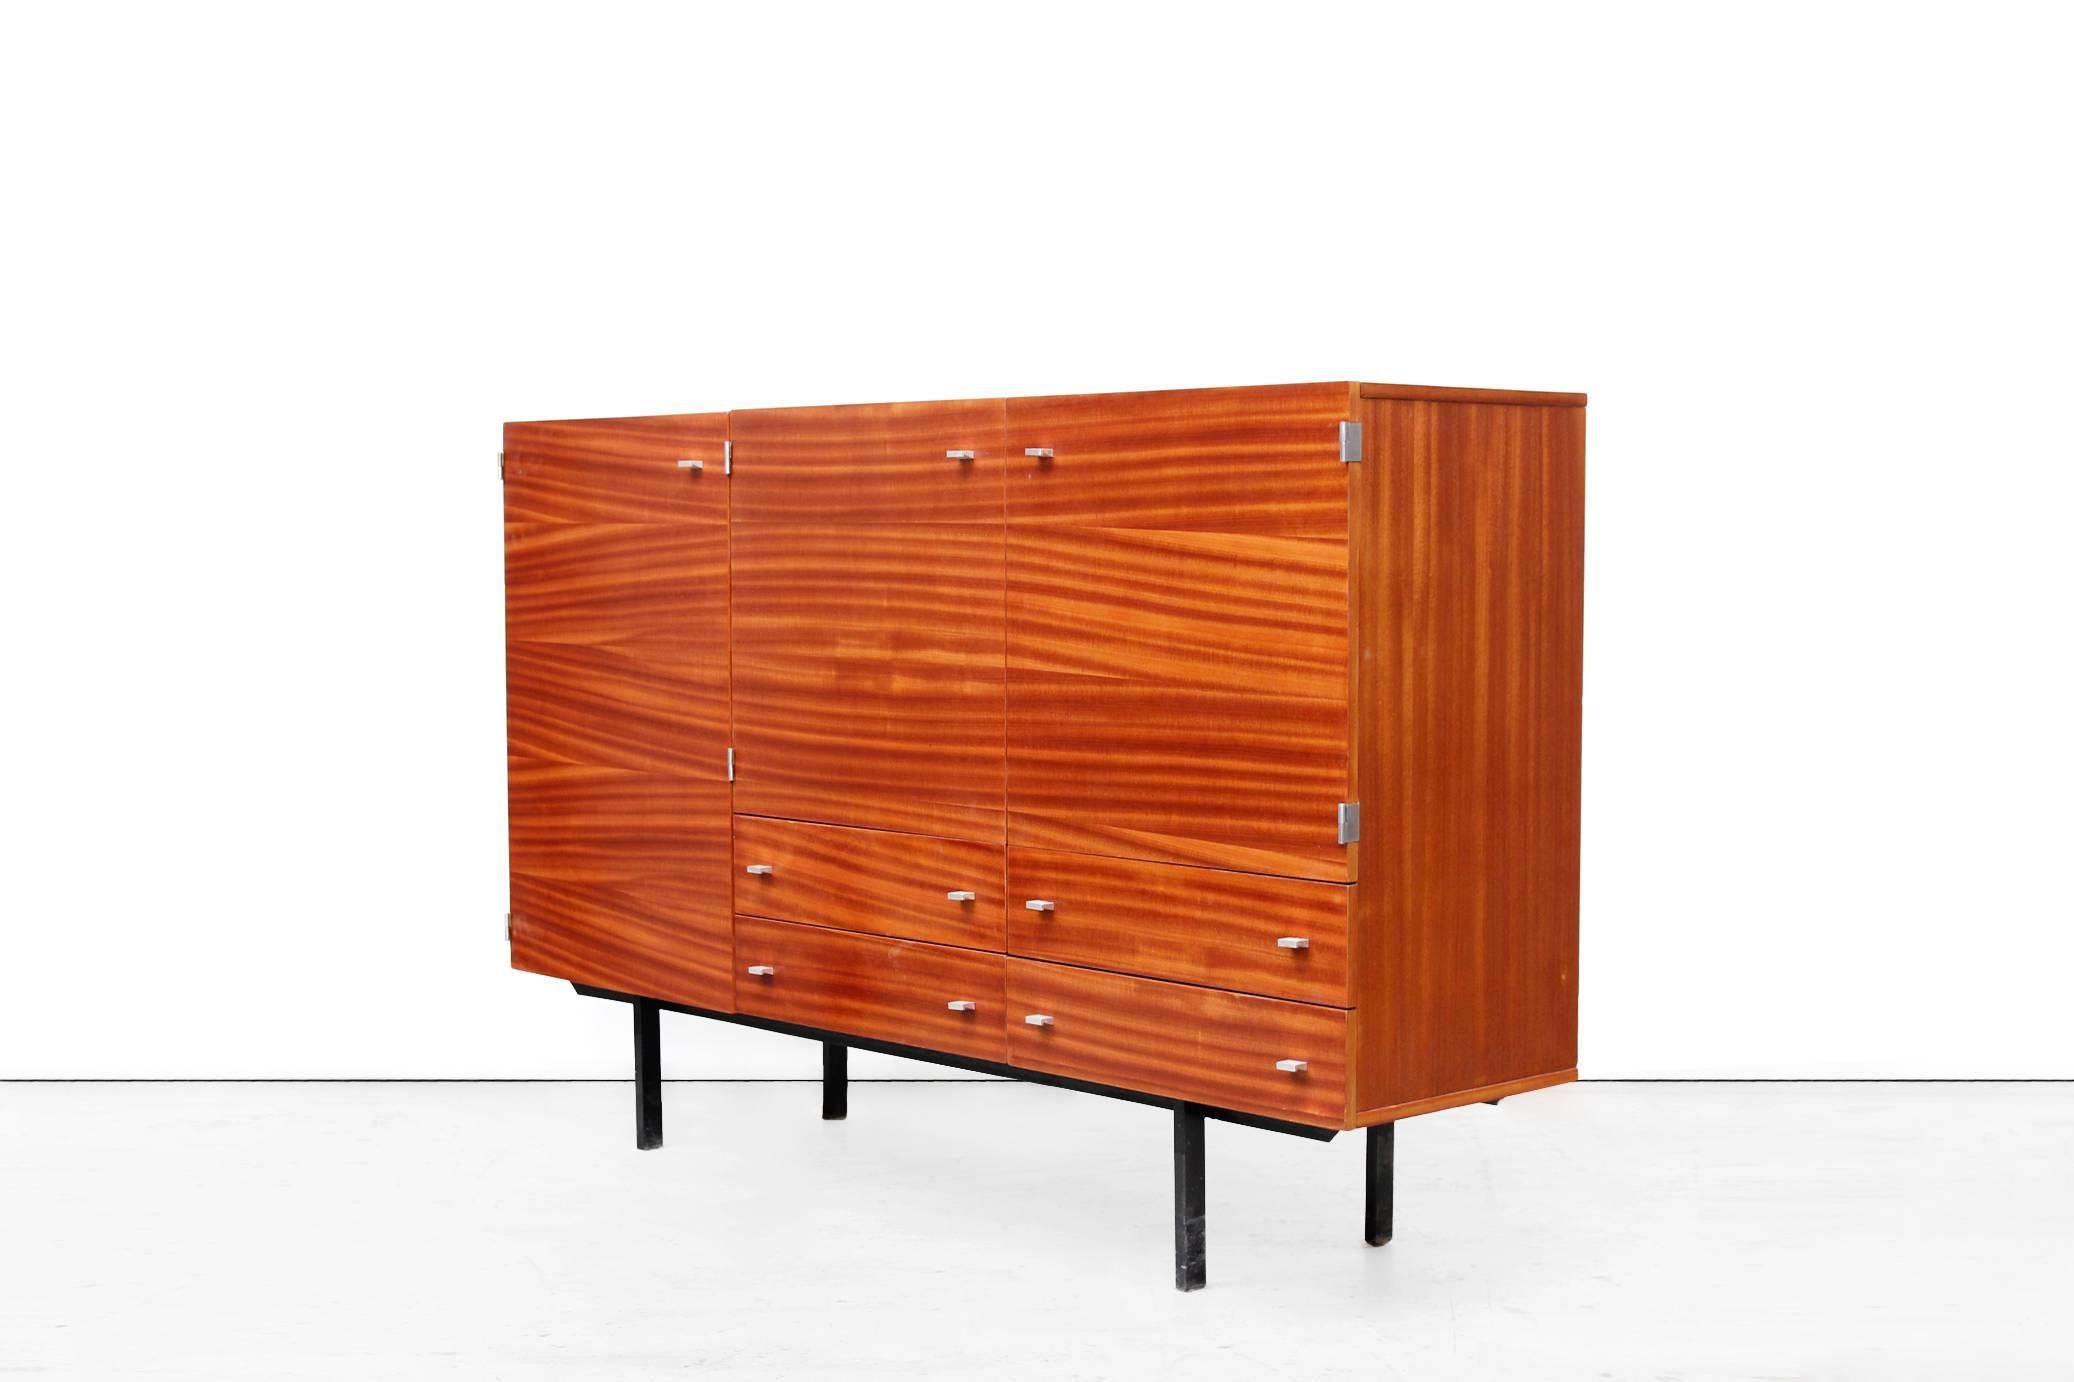 Beautiful credenza designed by Pierre Guariche for Meurop. This sleek Minimalist piece of furniture comes from Belgium and is of very good quality. The beautiful drawing in the teak veneered wood has become visible again after restoration.